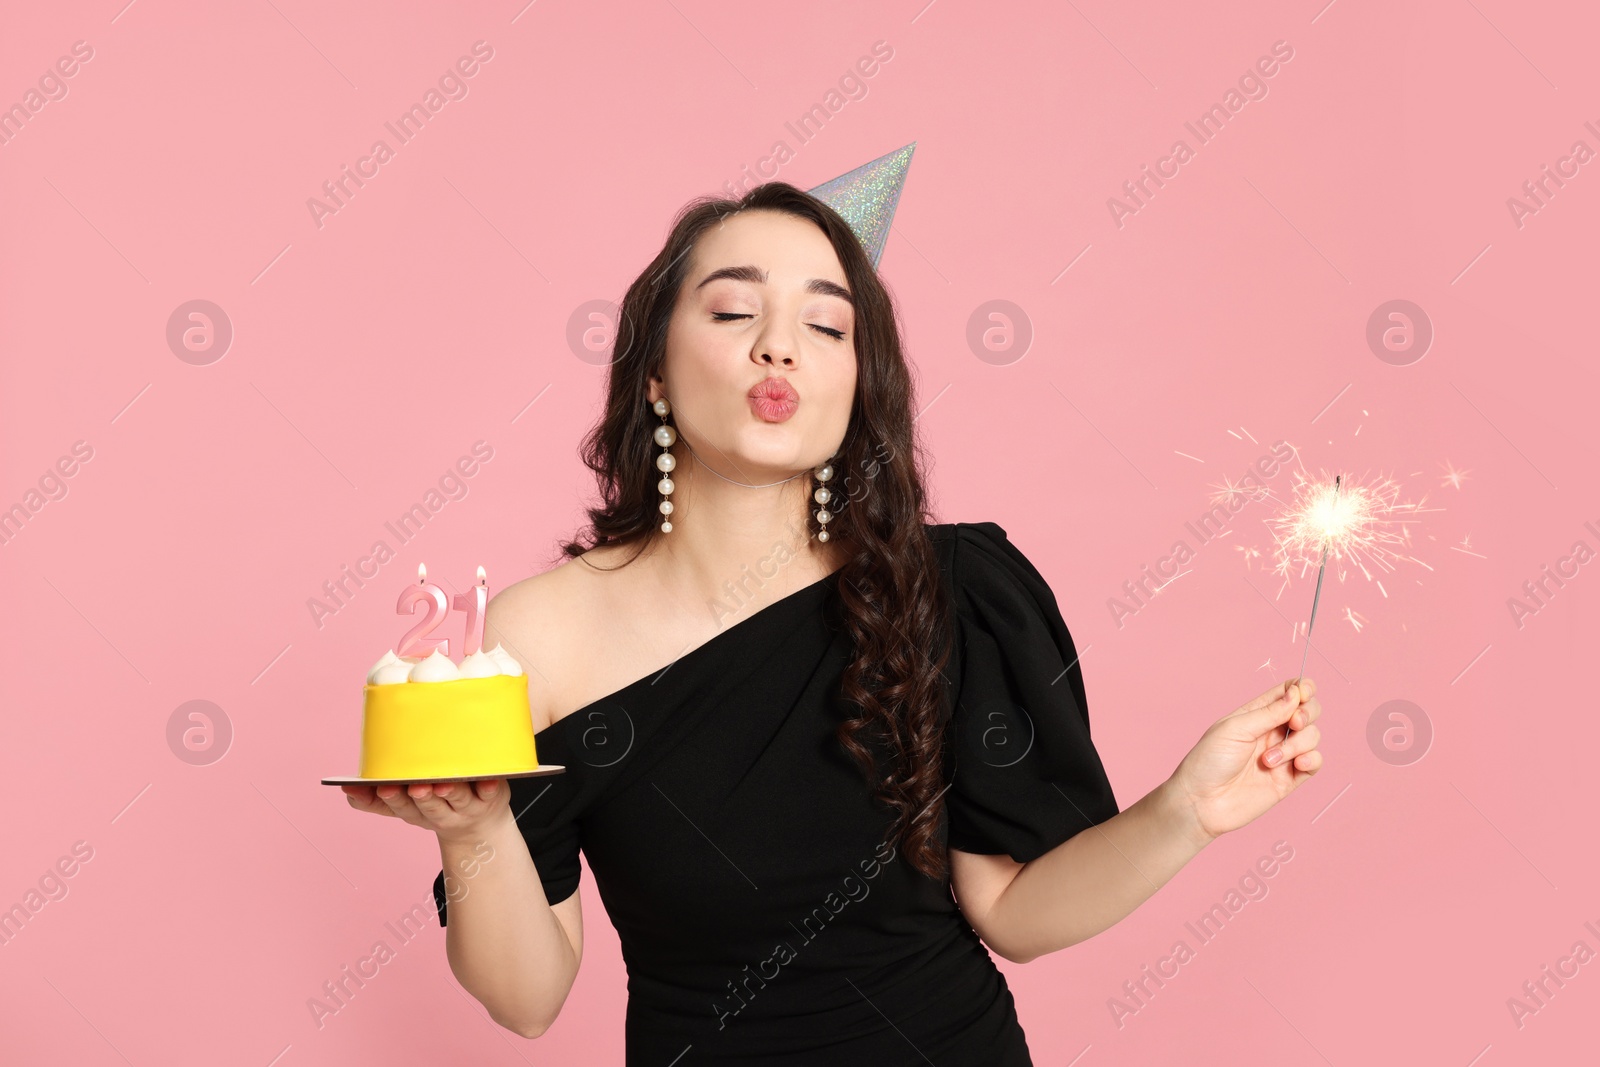 Photo of Coming of age party - 21st birthday. Woman sending air kiss and holding delicious cake with number shaped candles and sparkler on pink background